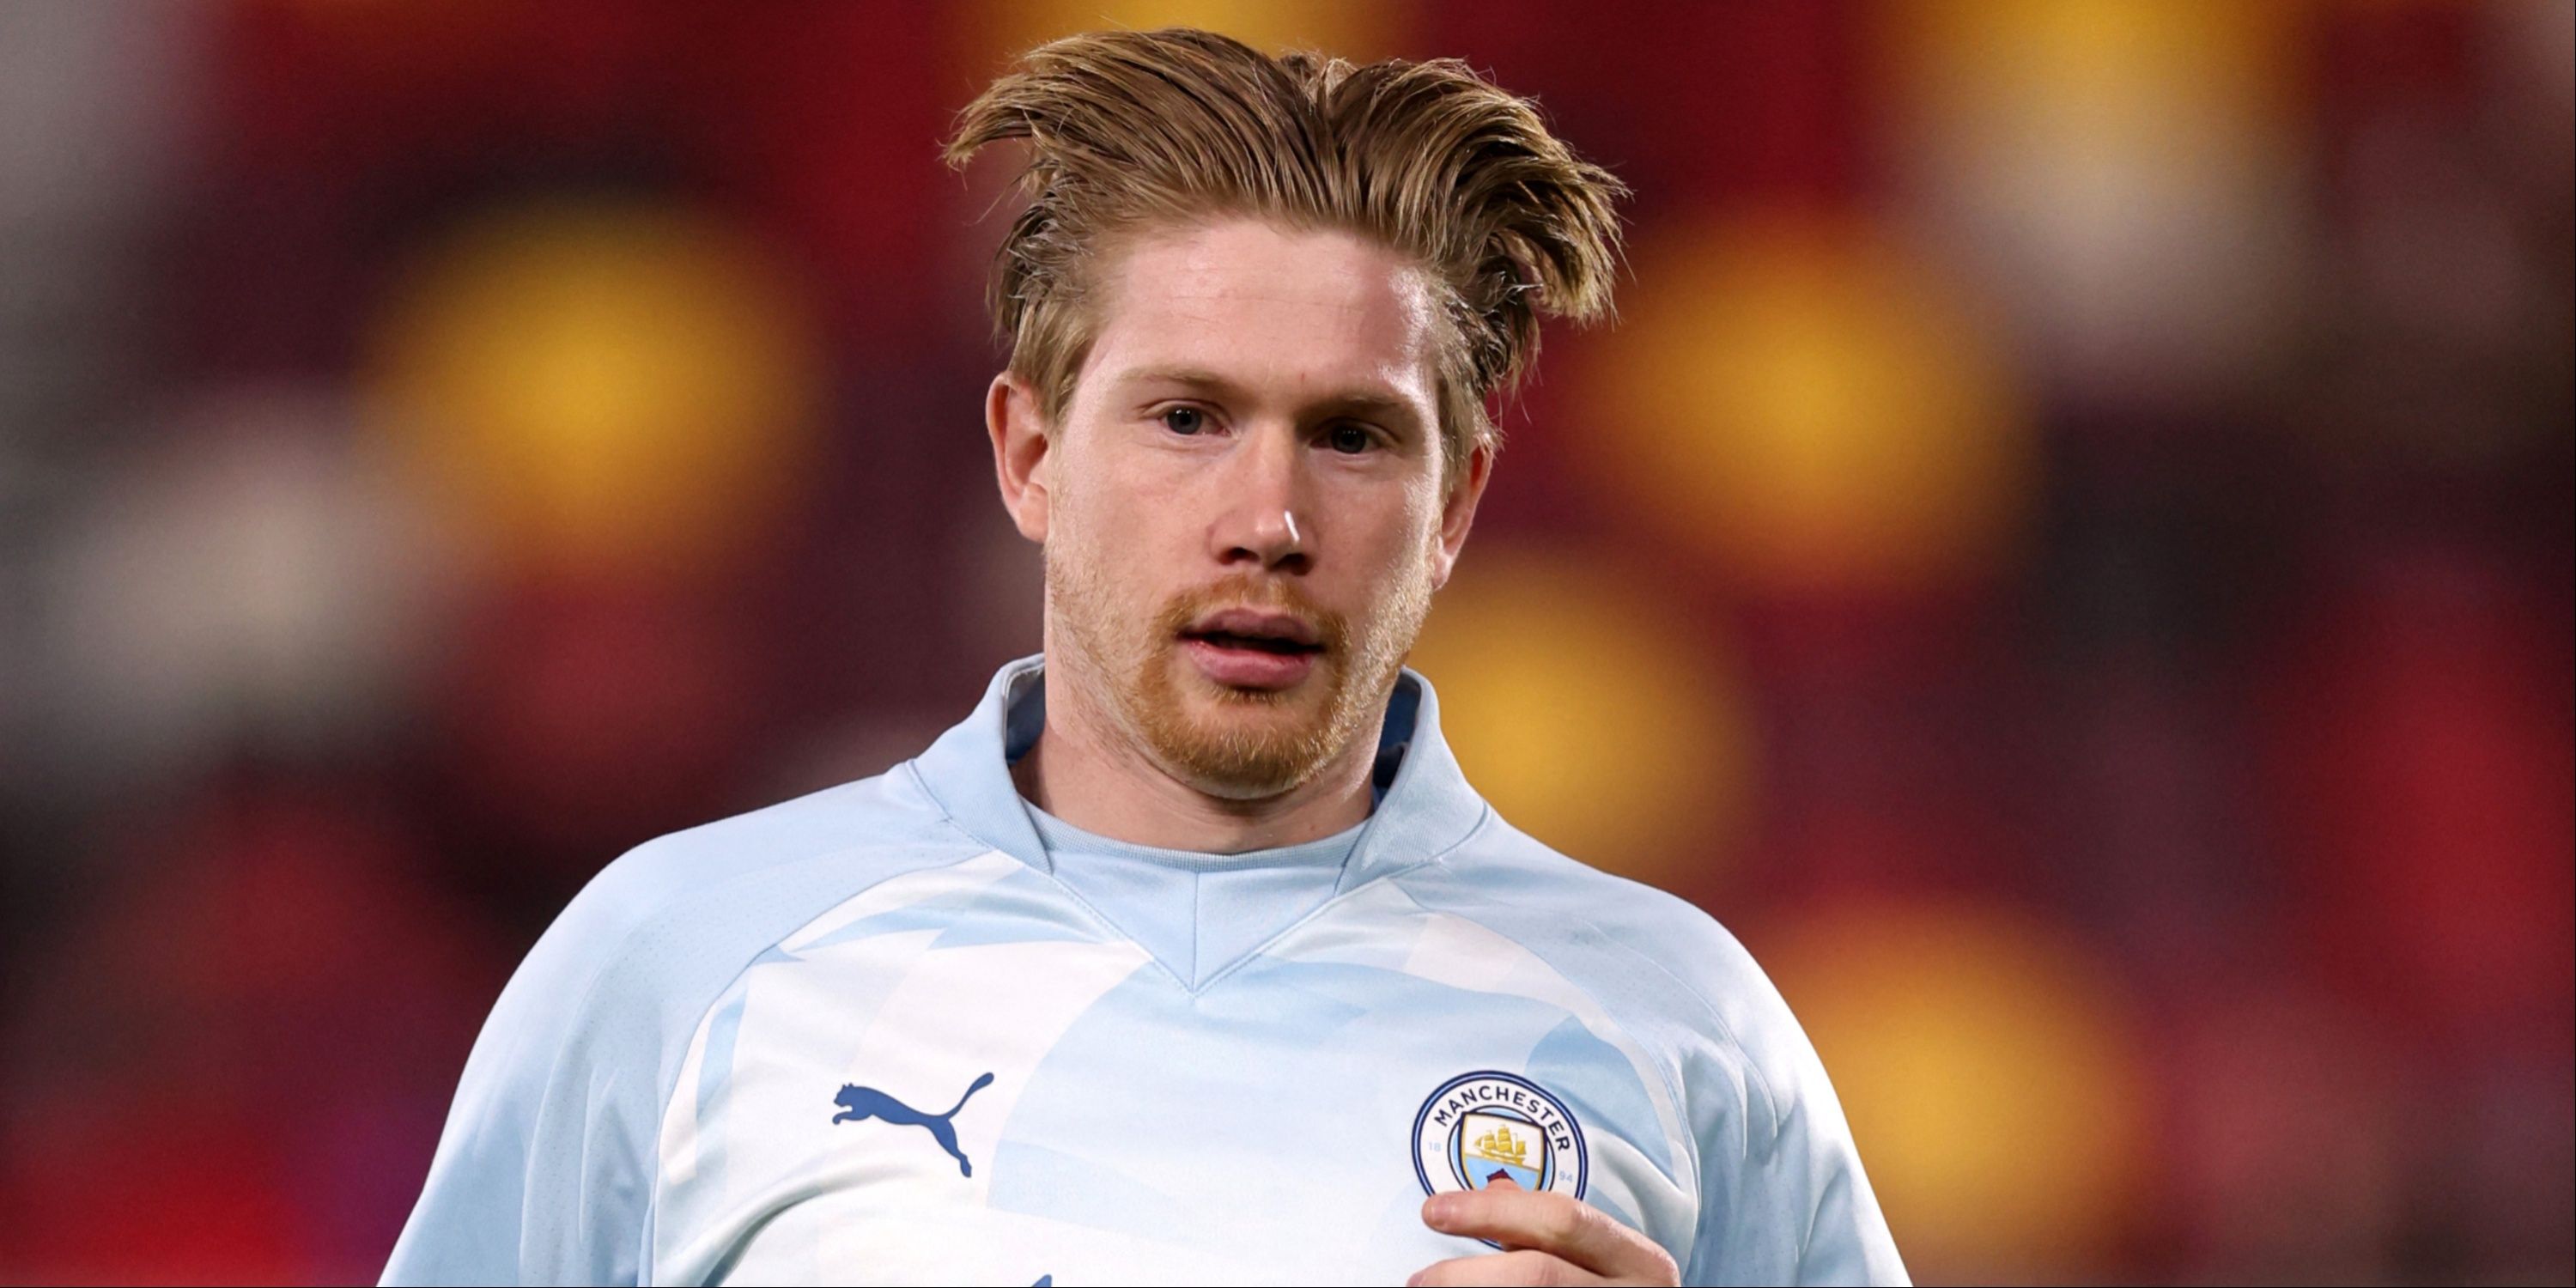 Manchester City creative midfielder Kevin De Bruyne during a pre-match warm-up